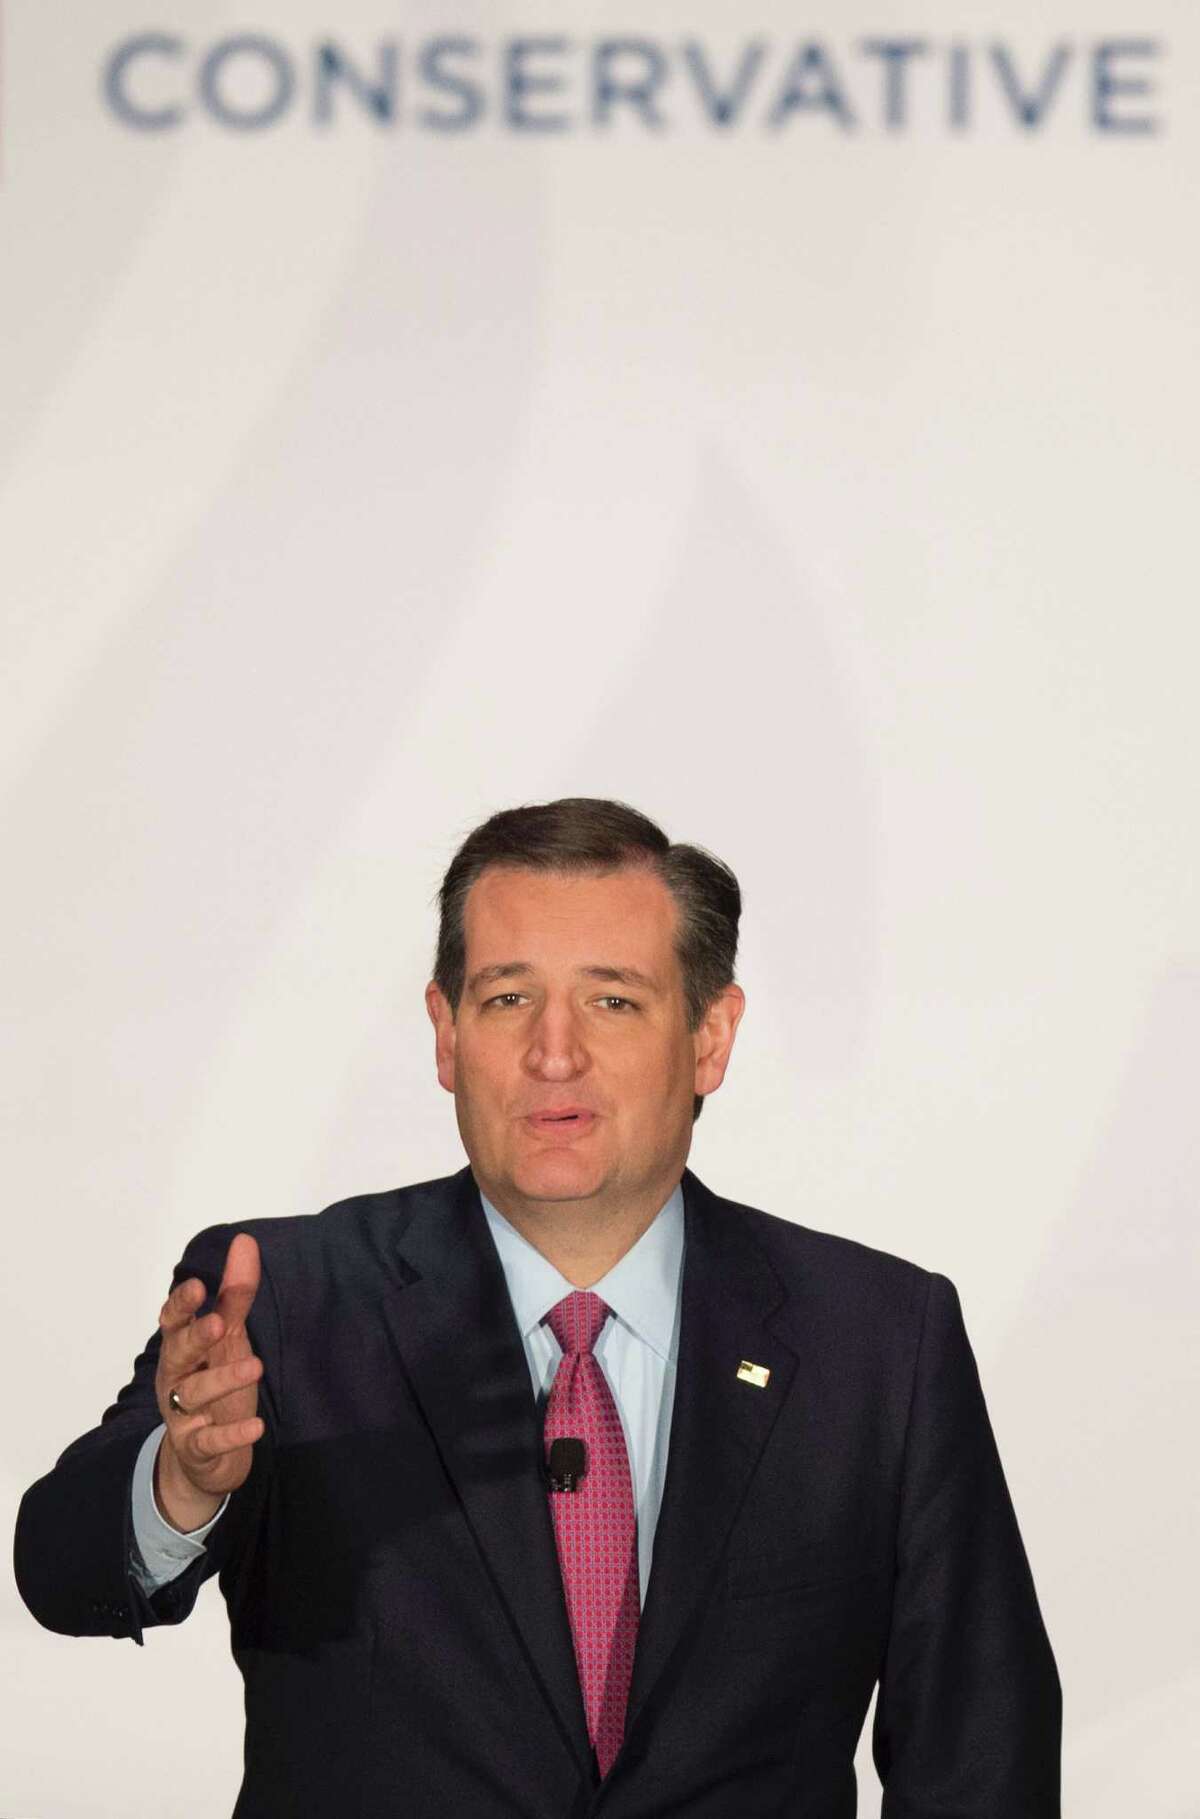 Republican presidential candidate Ted Cruz’s coffers have been boosted by scores of smaller gifts and by $25 million to SuperPACs that back his campaign.